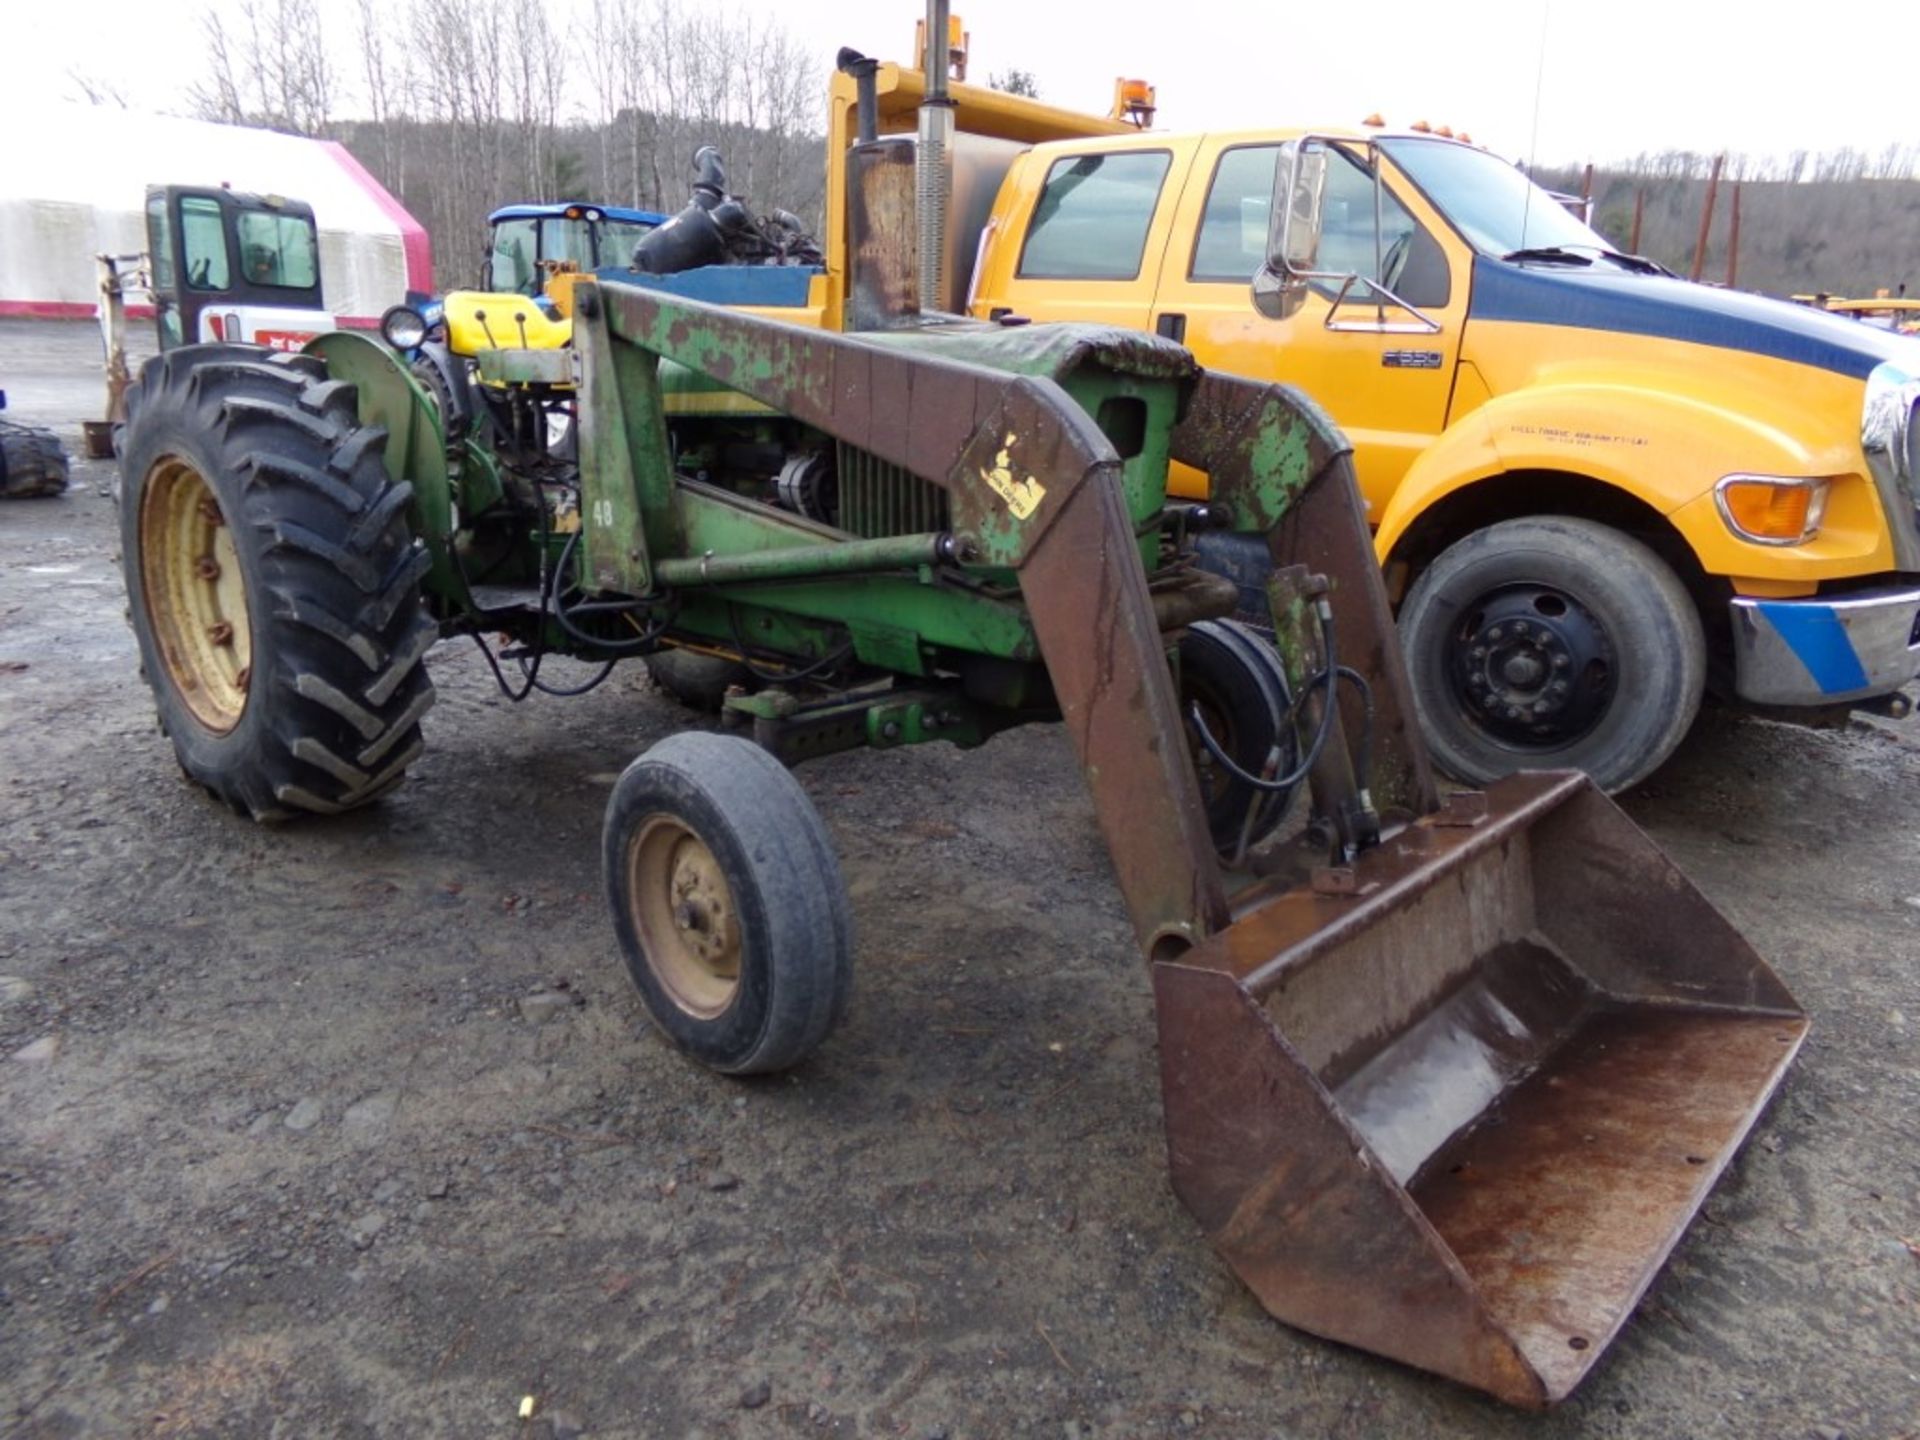 John Deere 2020 with Loader, Gas Engine, Model 48 Loader, PTO, 3pth, Single Remote In Rear, Mid Hyd. - Image 4 of 7